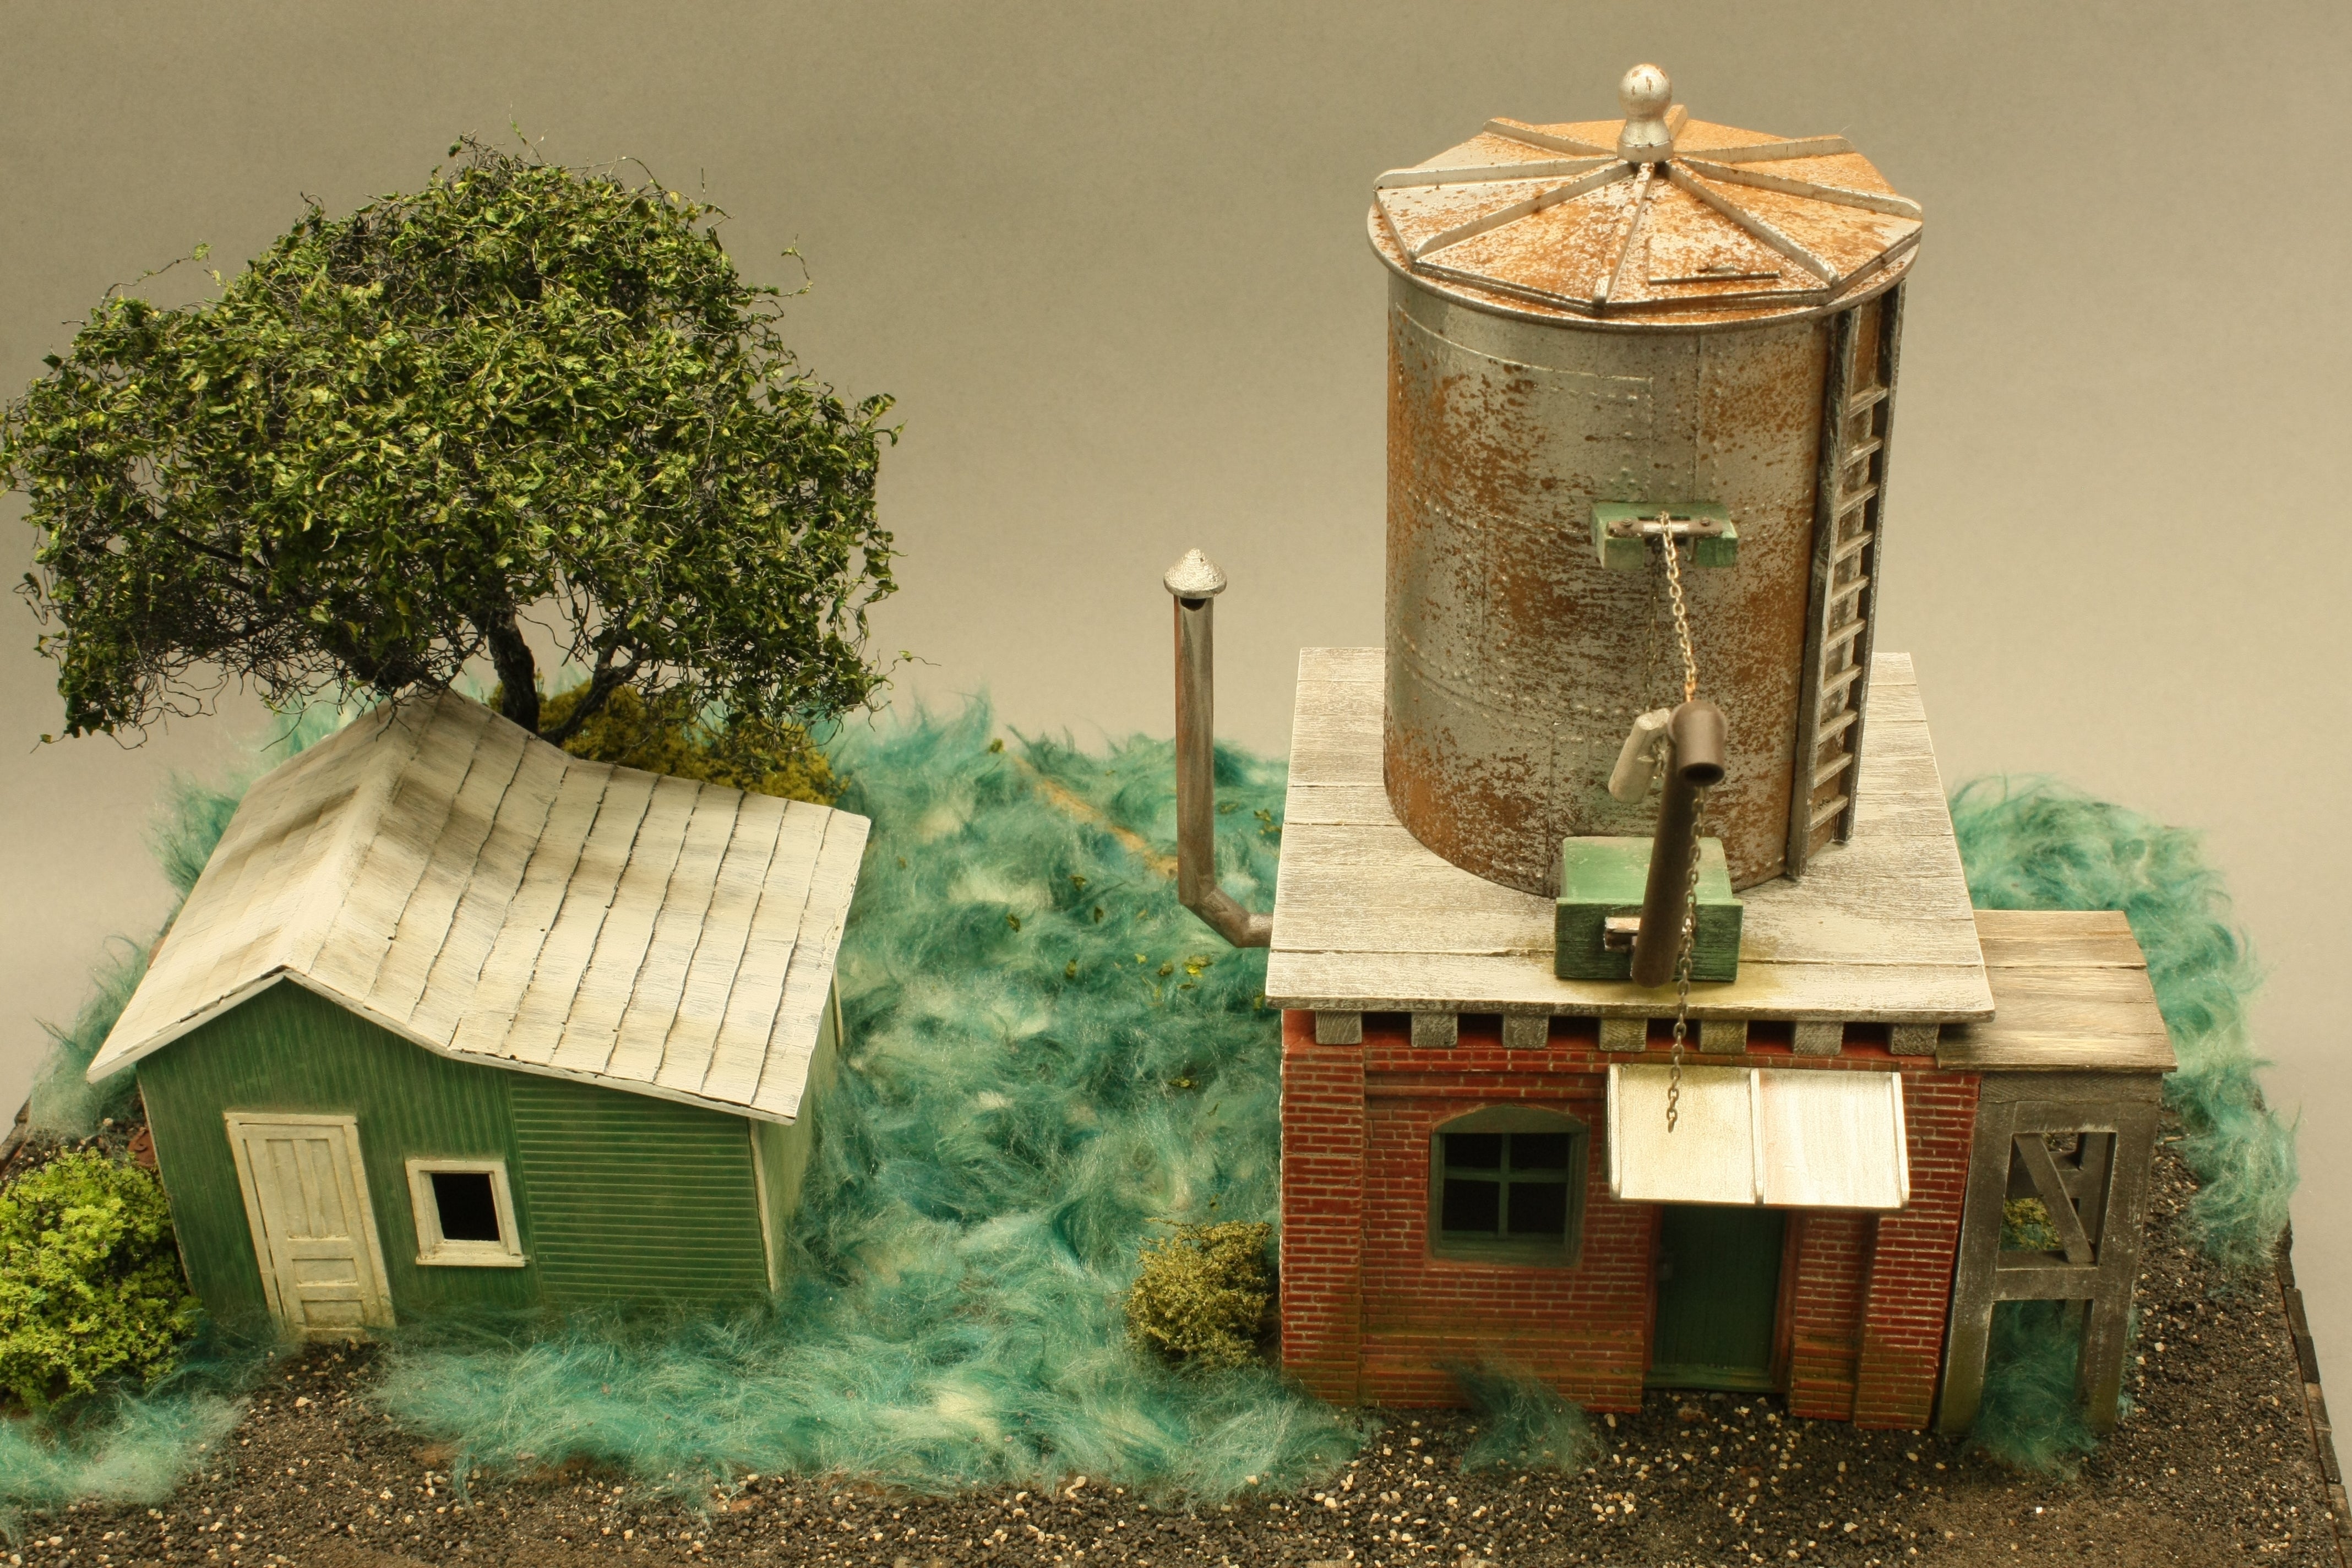 Schomberg Scale Structures - Garden Hill Tank & Office Kit